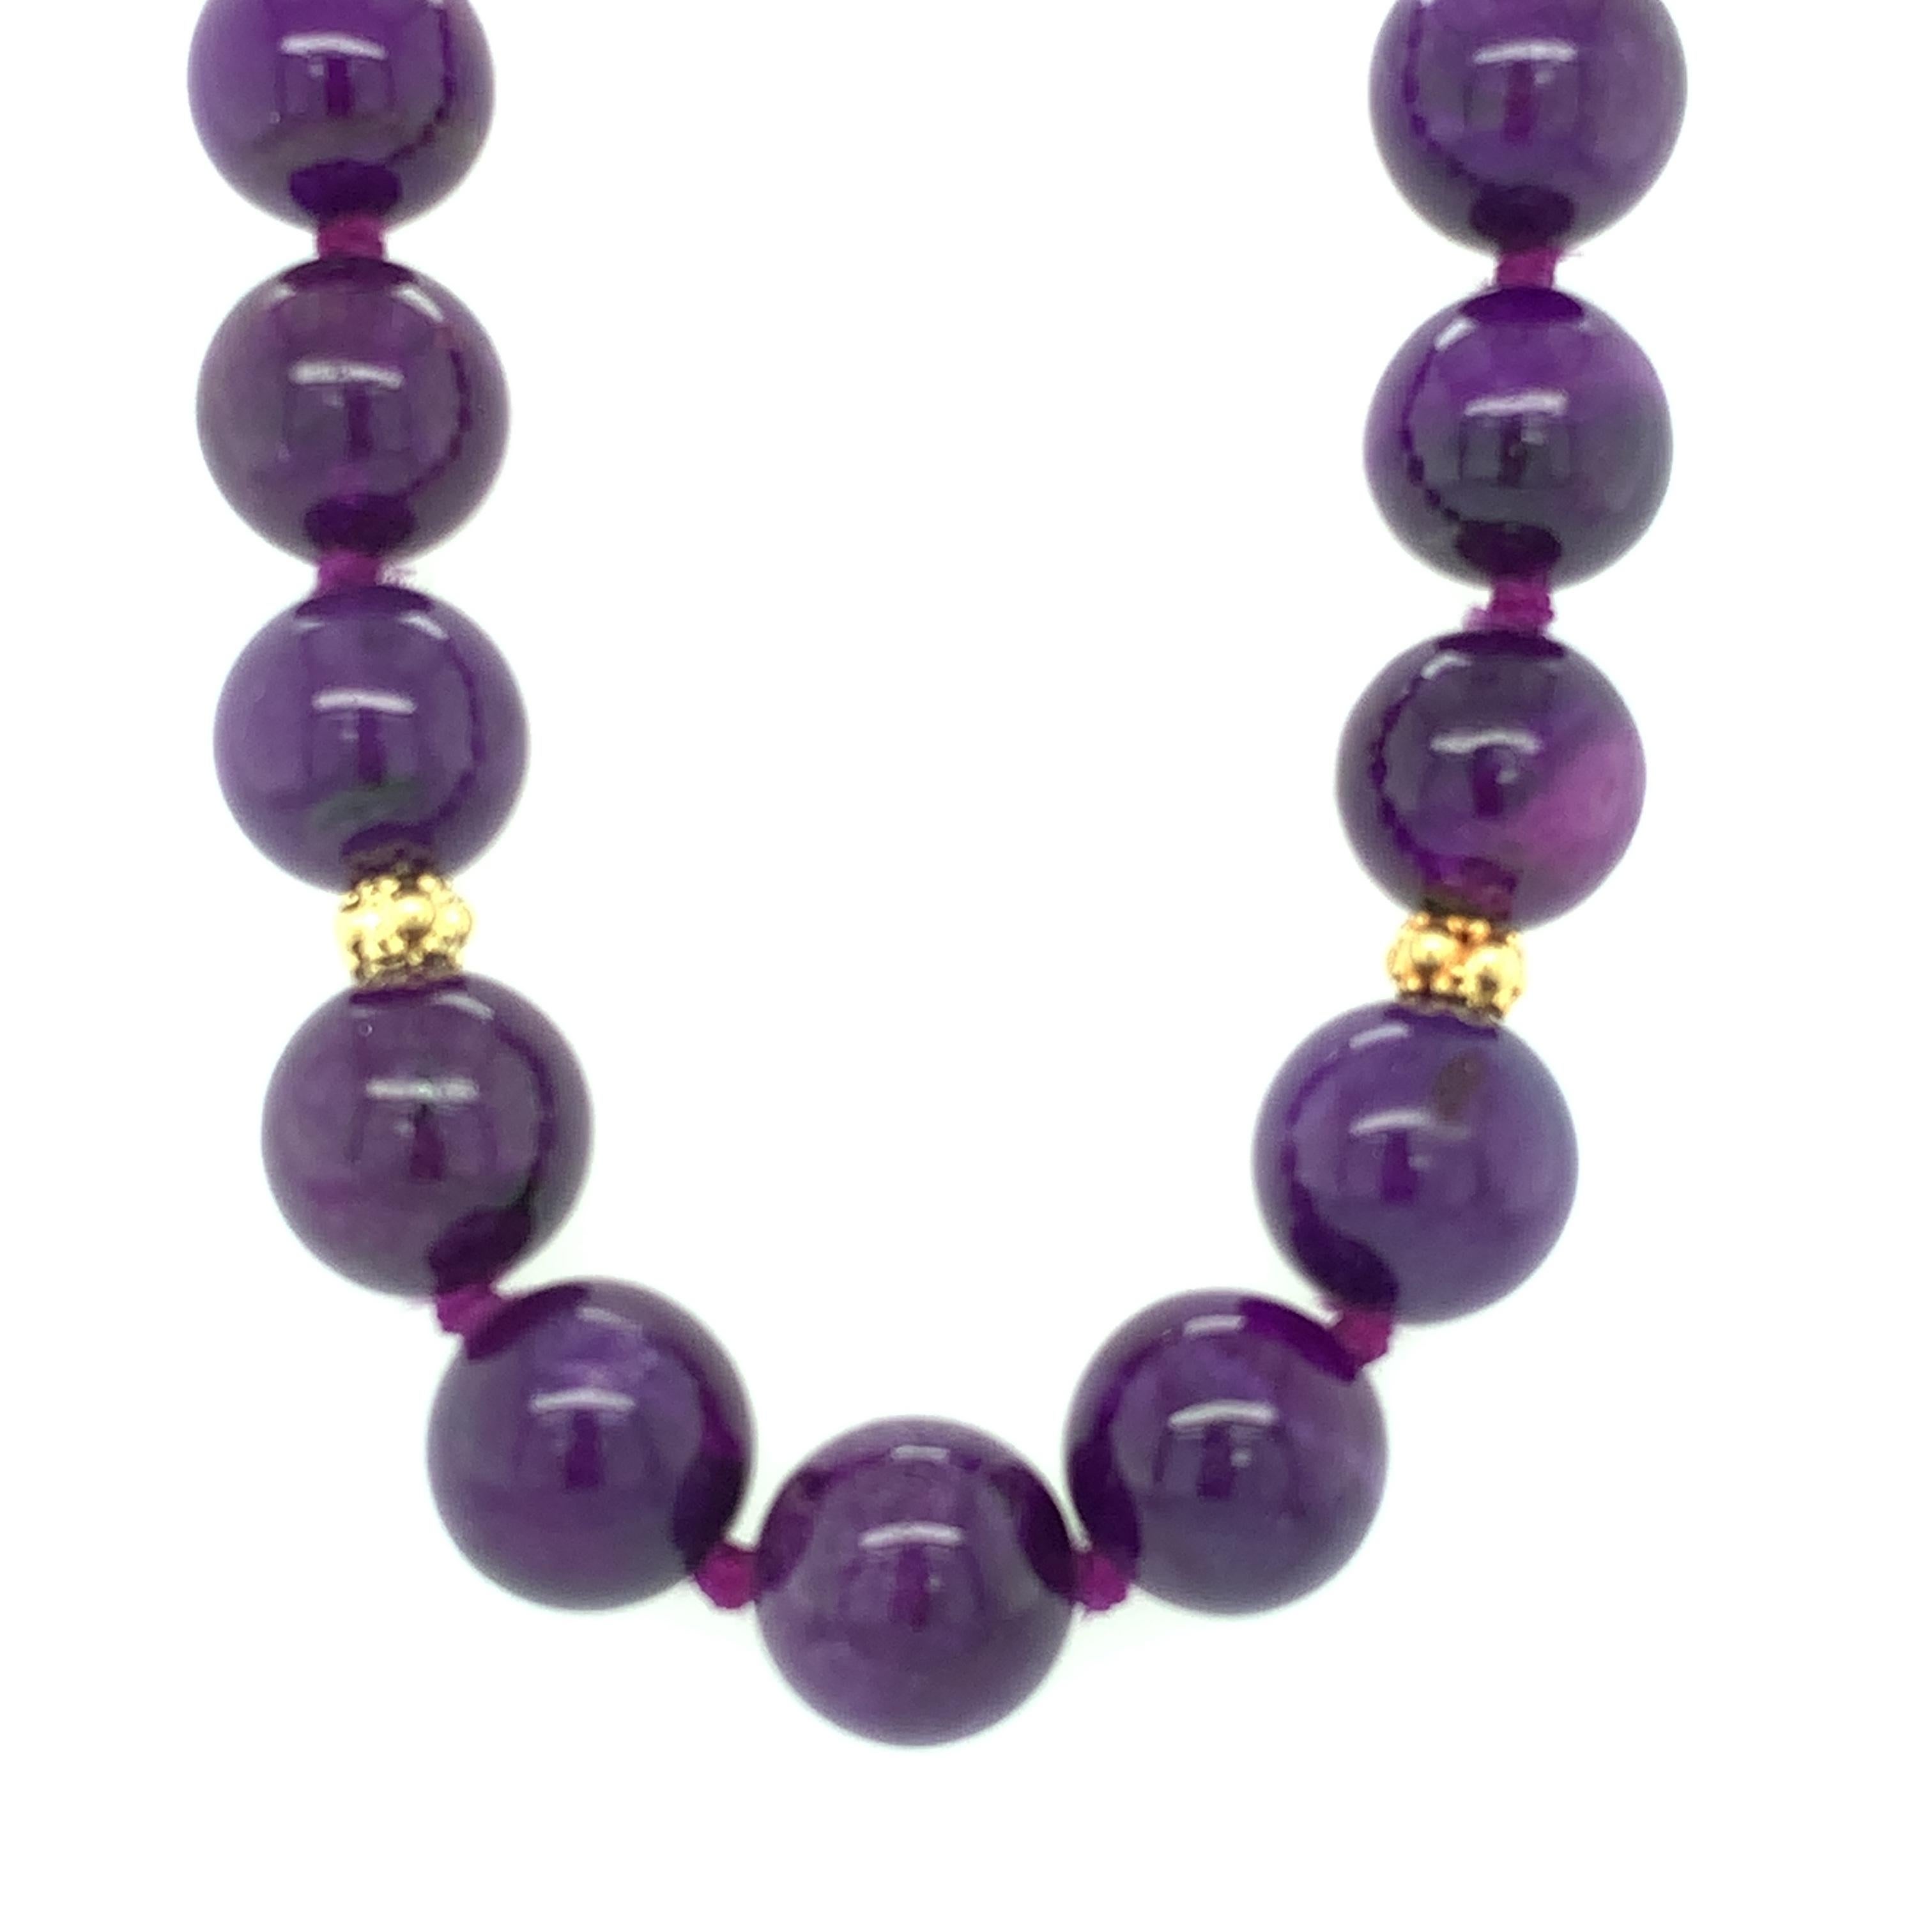 This striking necklace features 10.00mm beads fashioned from sugilite, a gorgeous, relatively rare mineral from South Africa that is prized for its intense purple color. These fine-quality beads are extremely well-matched, with rich, even purple